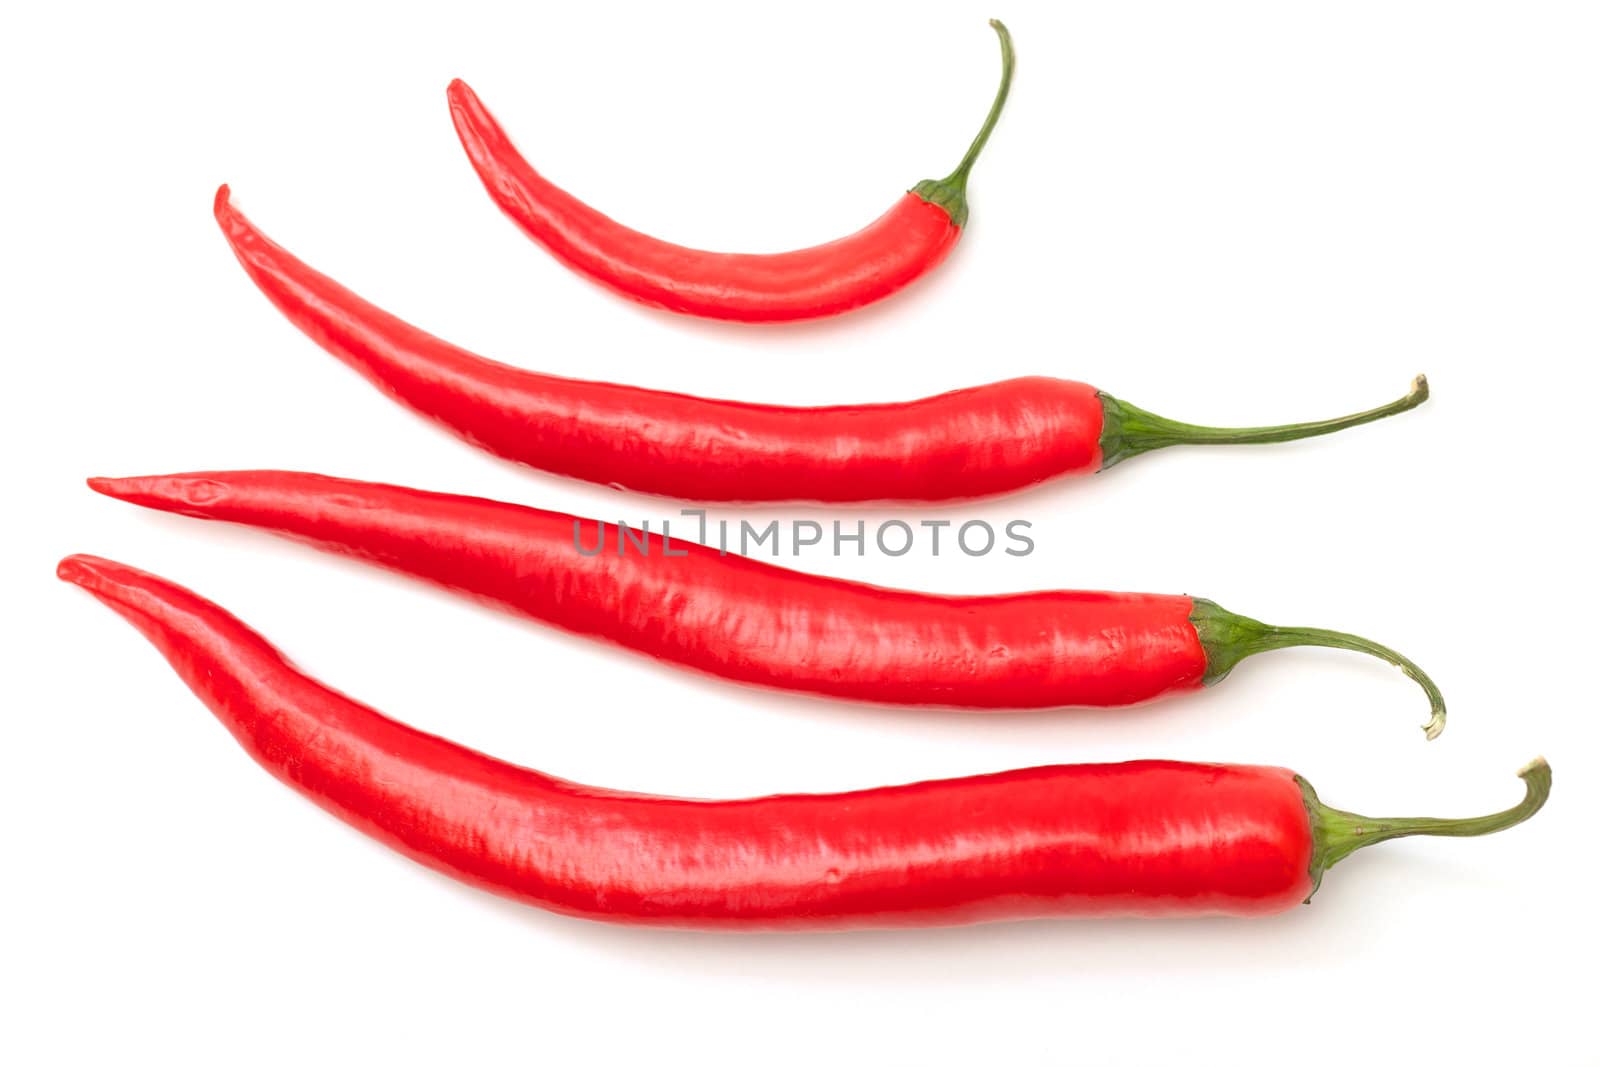 Chili pepper by Discovod